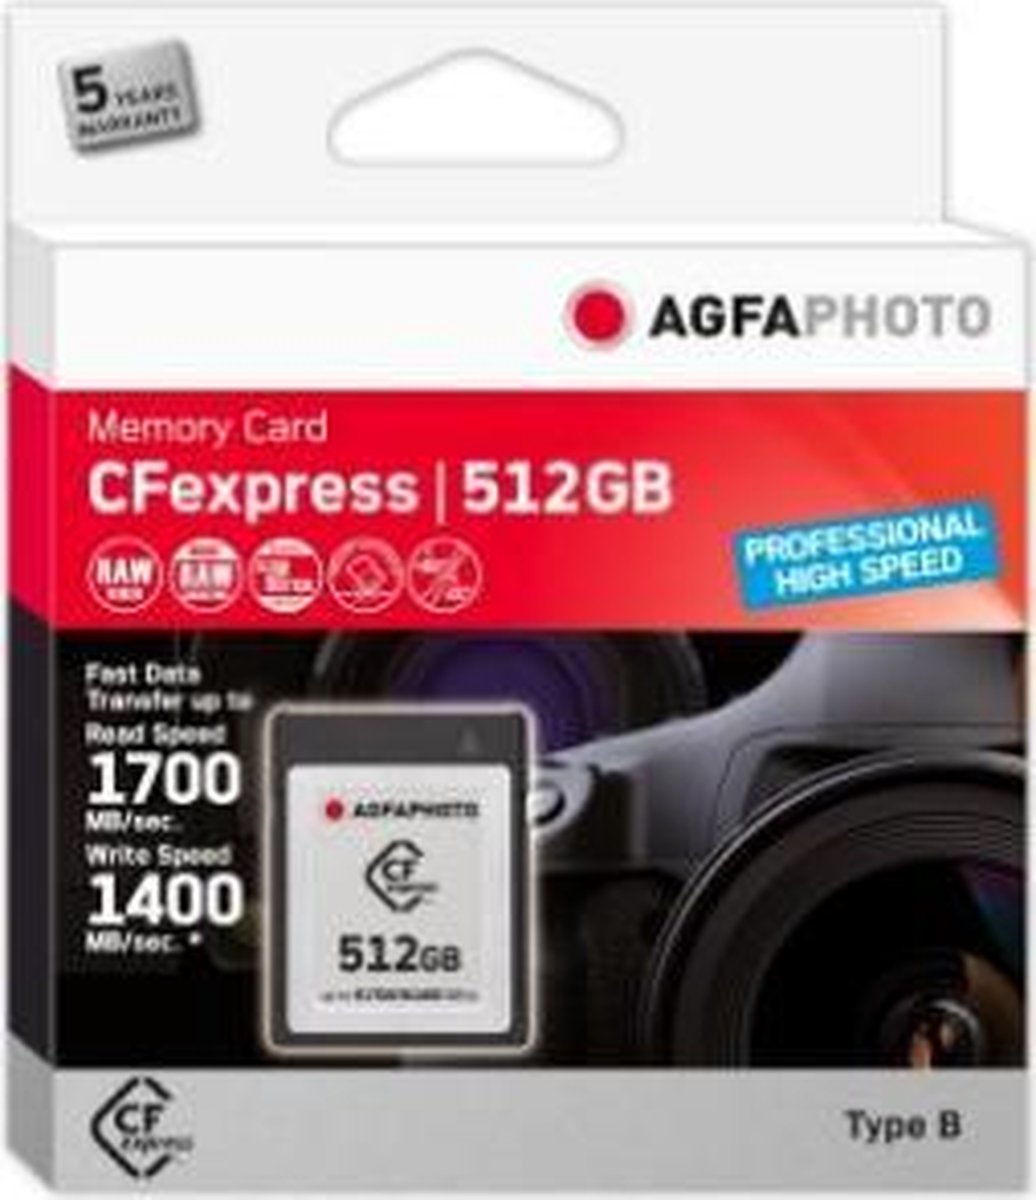 AgfaPhoto CFexpress 512GB Professional High Speed